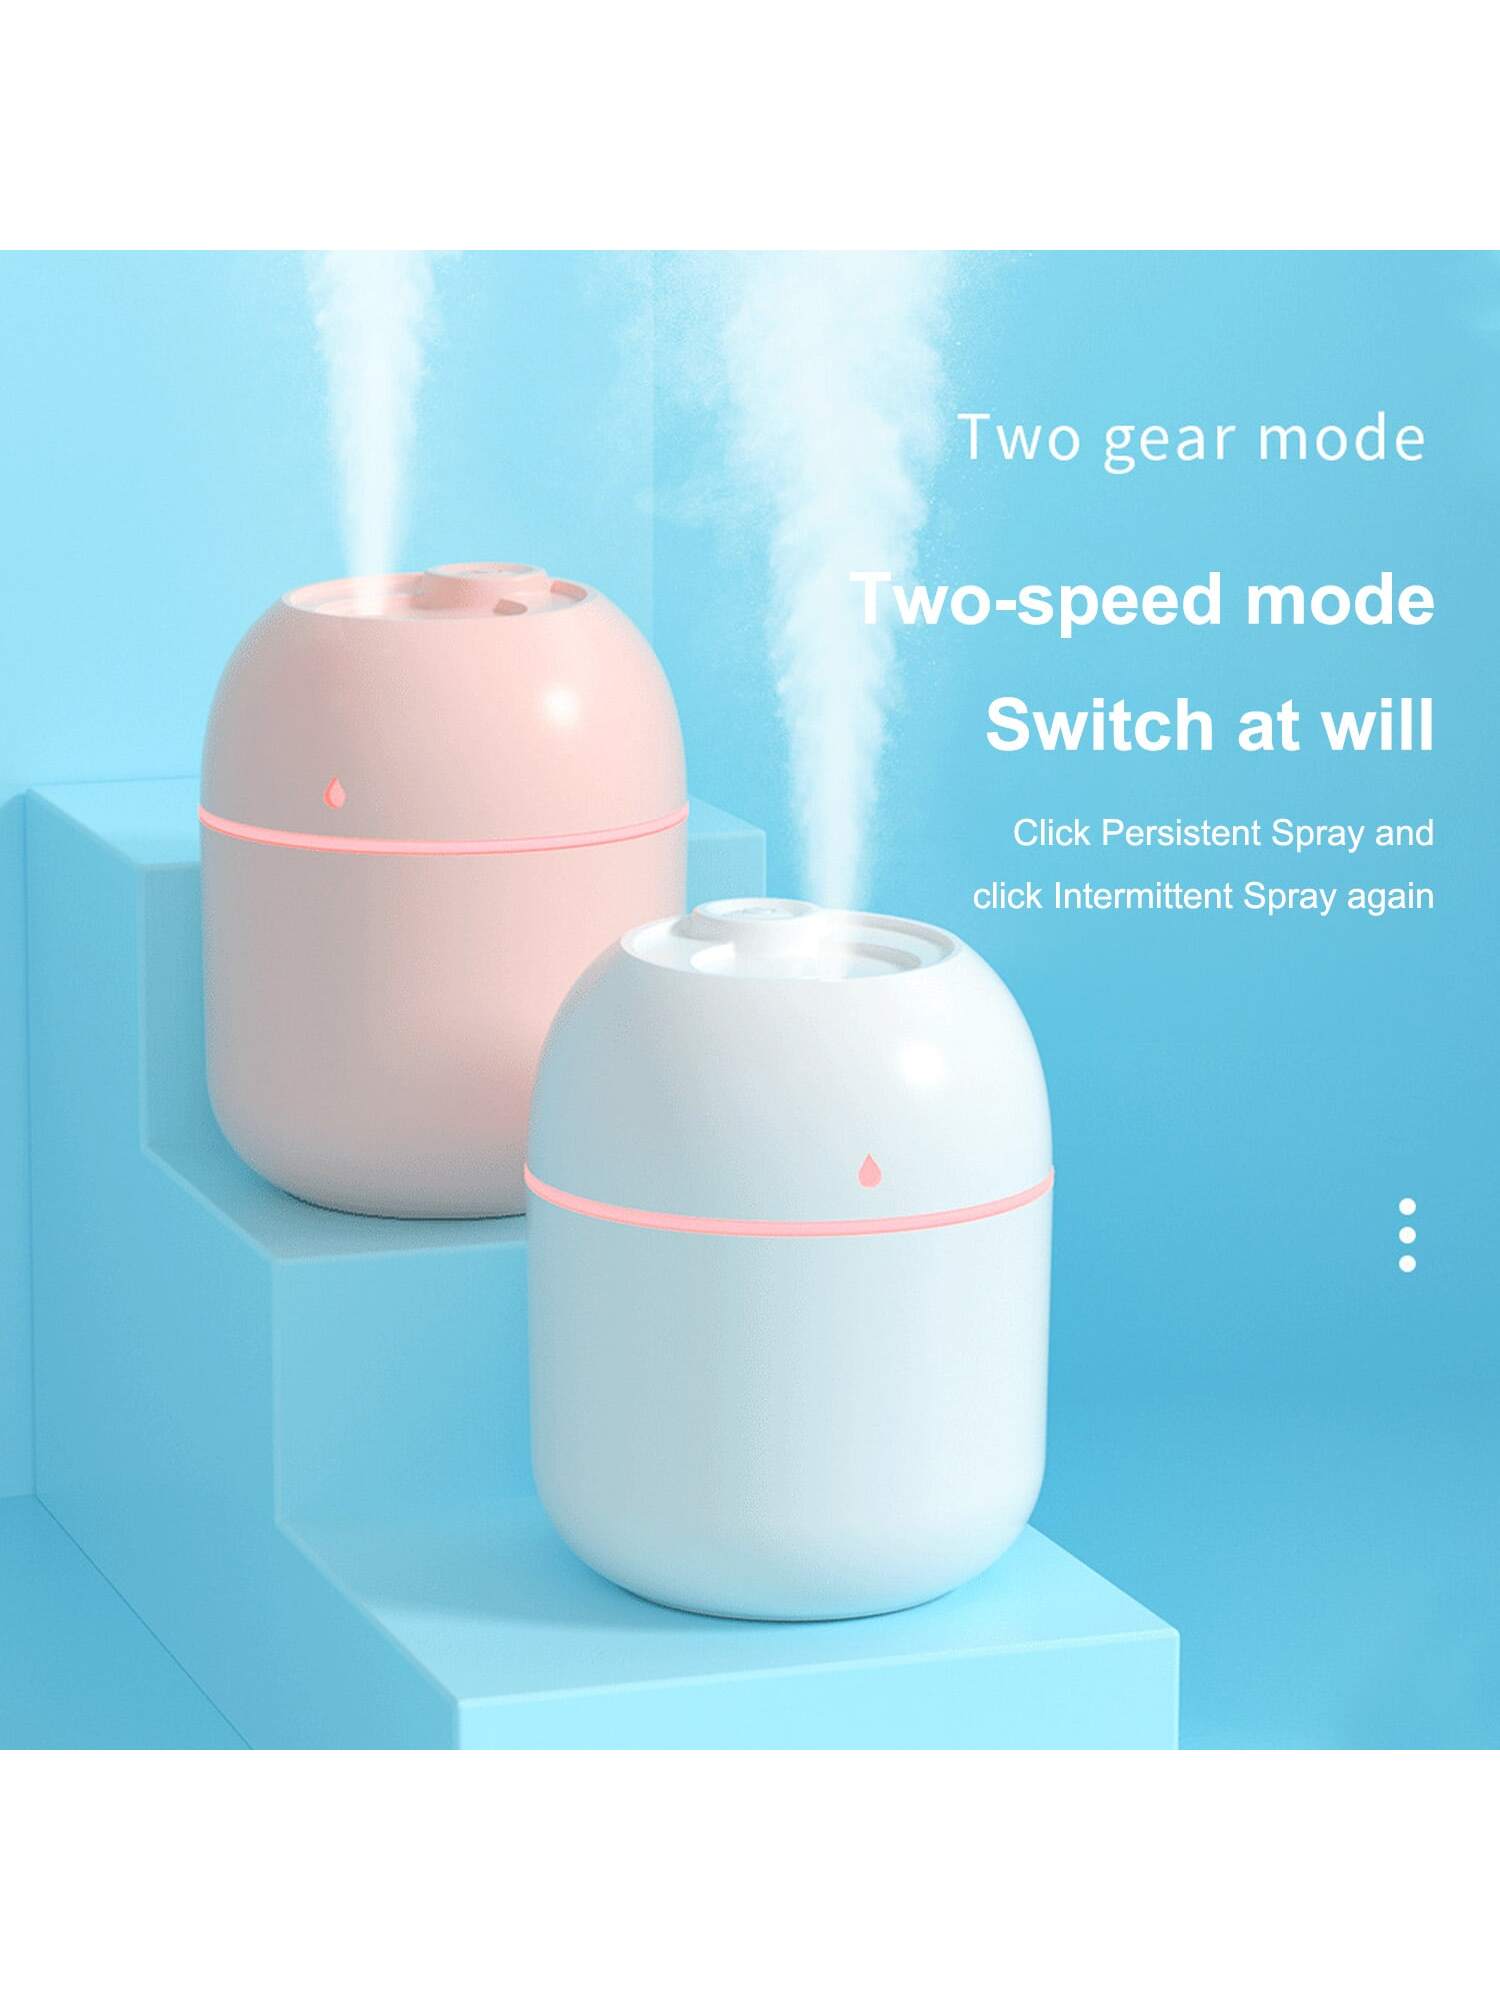 250ml Mini Egg Drop Humidifier Car Fog Home Desktop Air Mute Small Humidifier(The humidifier works only when plugged in)-White-6